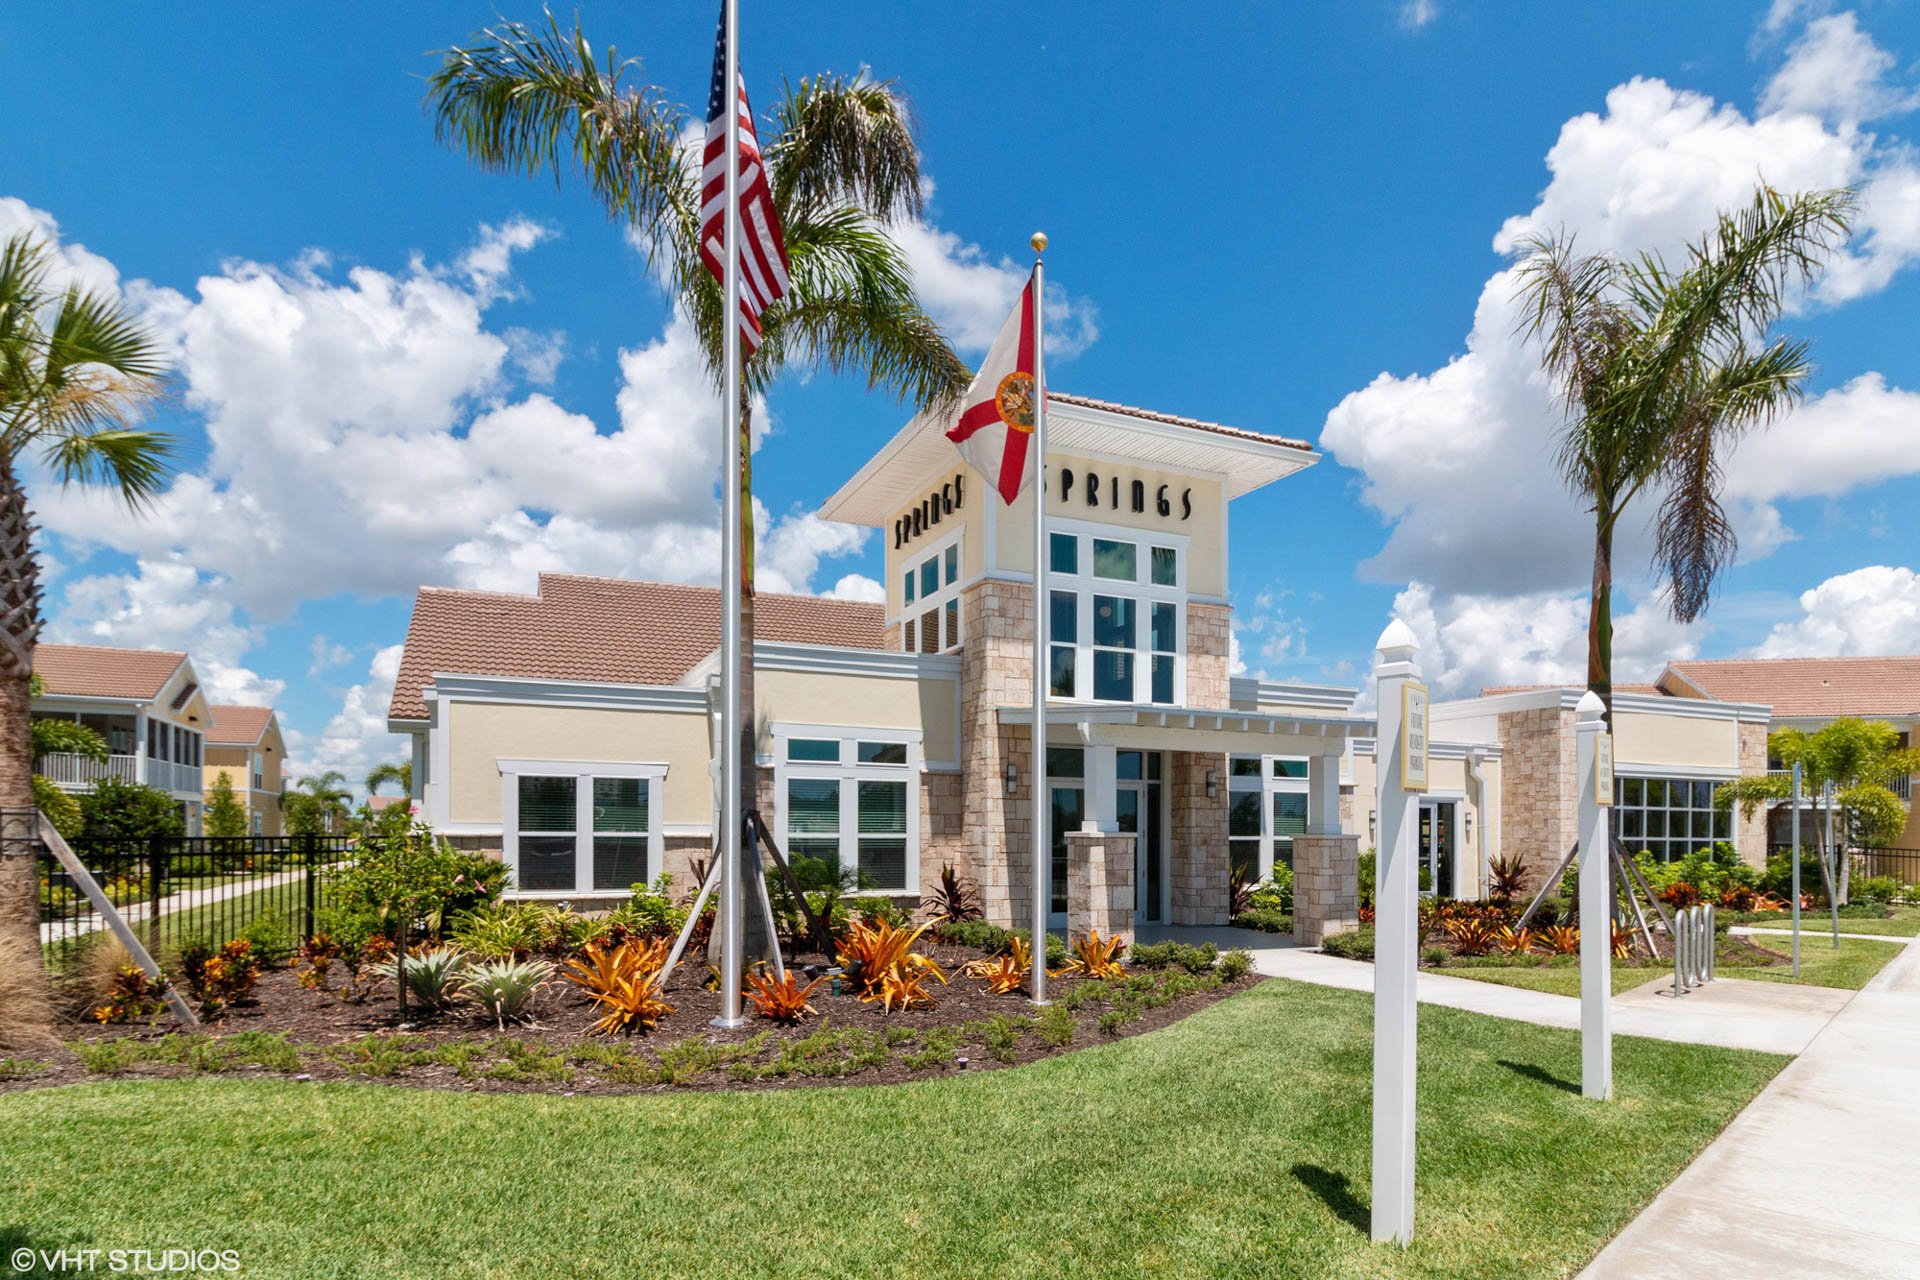 Port St. Lucie Apartments for Rent